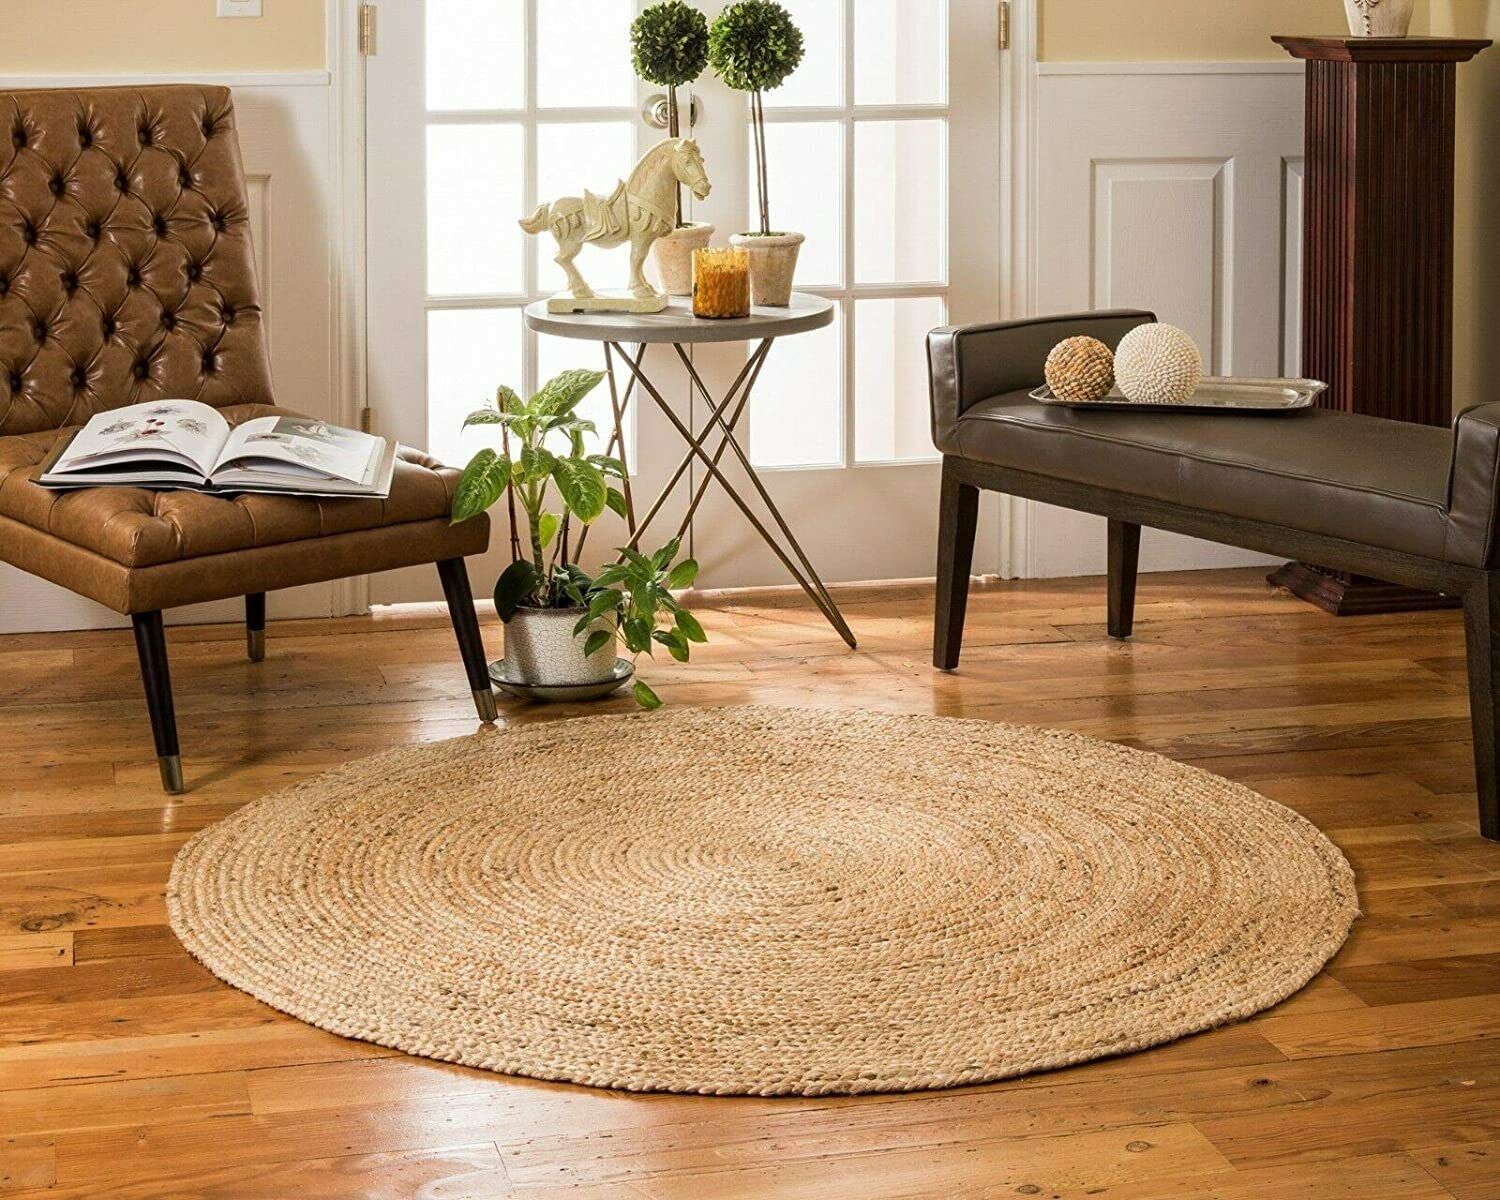 120cm, Hand Woven Braided Jute Area Rug, Round, Reversible,color May Vary |  Ebay With Hand Woven Braided Rugs (View 11 of 15)